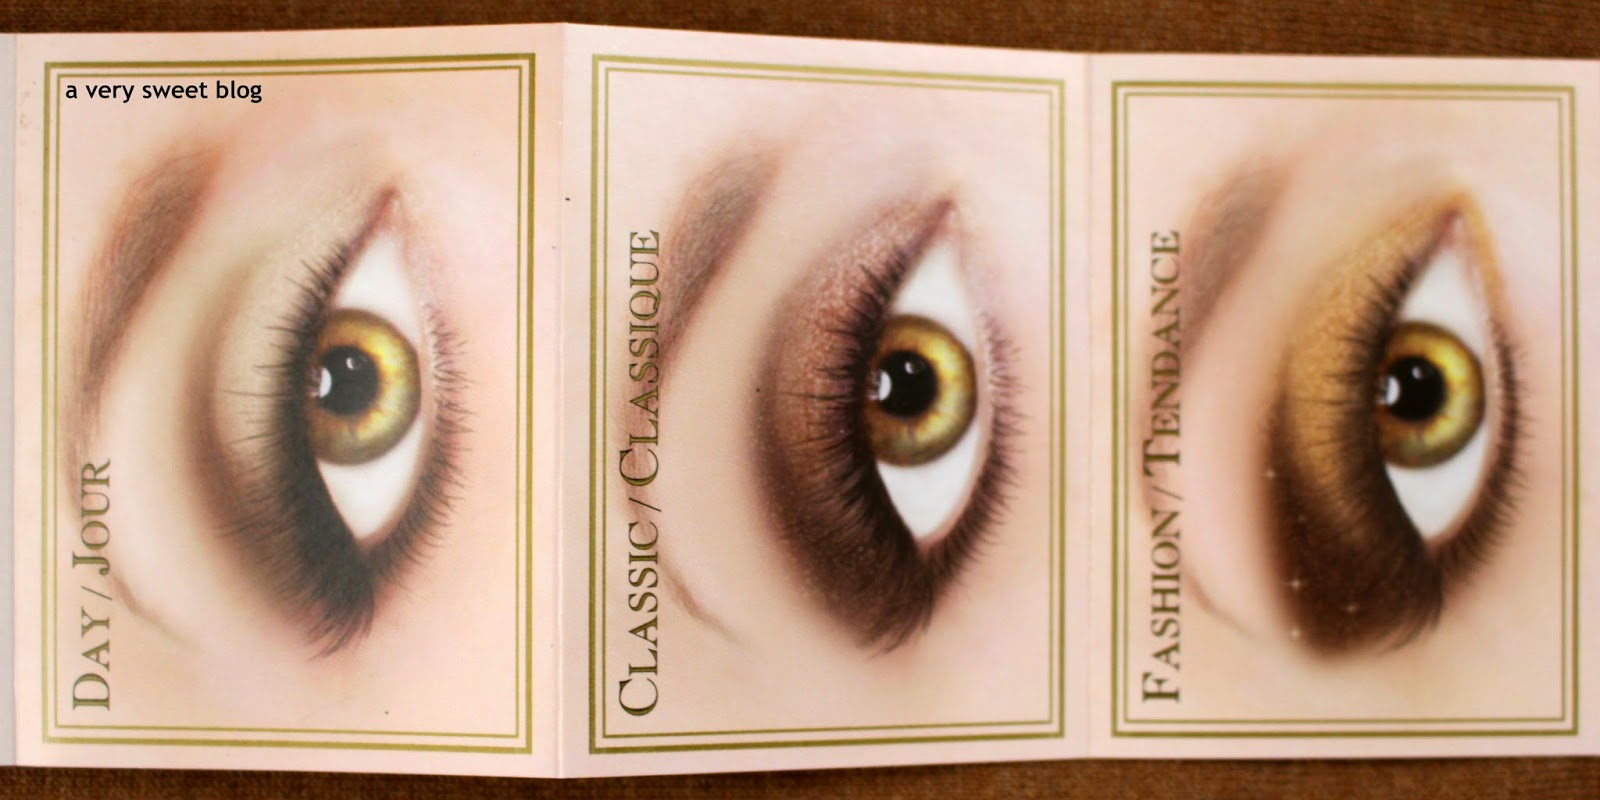 too faced natural eyes review